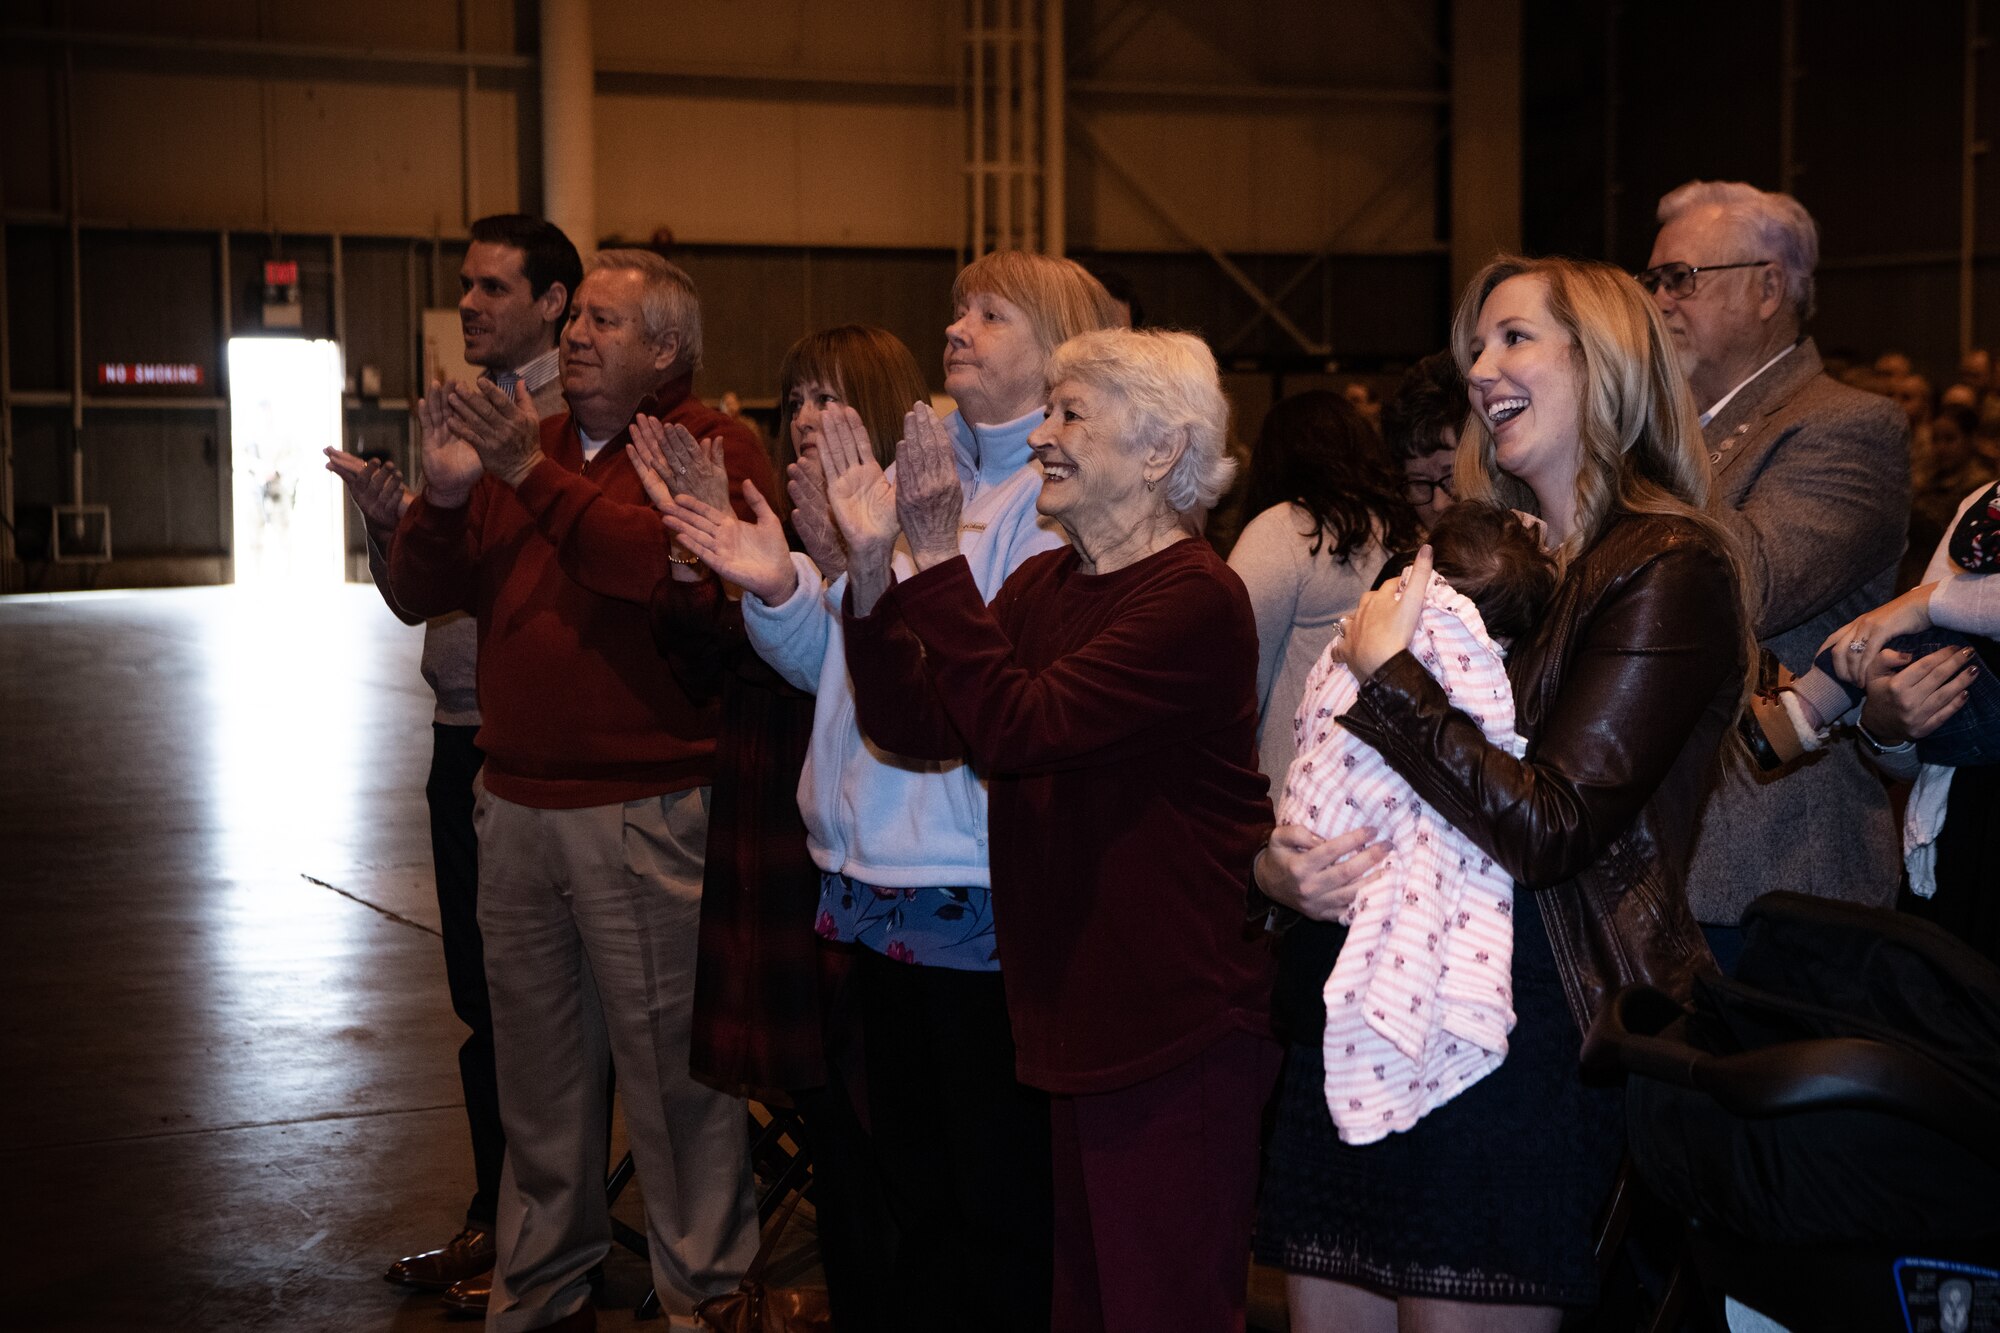 The family and friends of Master Sgt. Bryan Whittle, assigned to the 205th Engineering and Installation Squadron, celebrate as Whittle receives his Airman’s Medal during a ceremony at Will Rogers Air National Guard Base in Oklahoma City, Dec. 8, 2019. The Airman’s Medal is the highest noncombat award given in the Air Force and awarded to service members who distinguish themselves by a heroic act, usually at the voluntary risk of their own life. (U.S. Air National Guard photo by Staff Sgt. Jordan Martin)